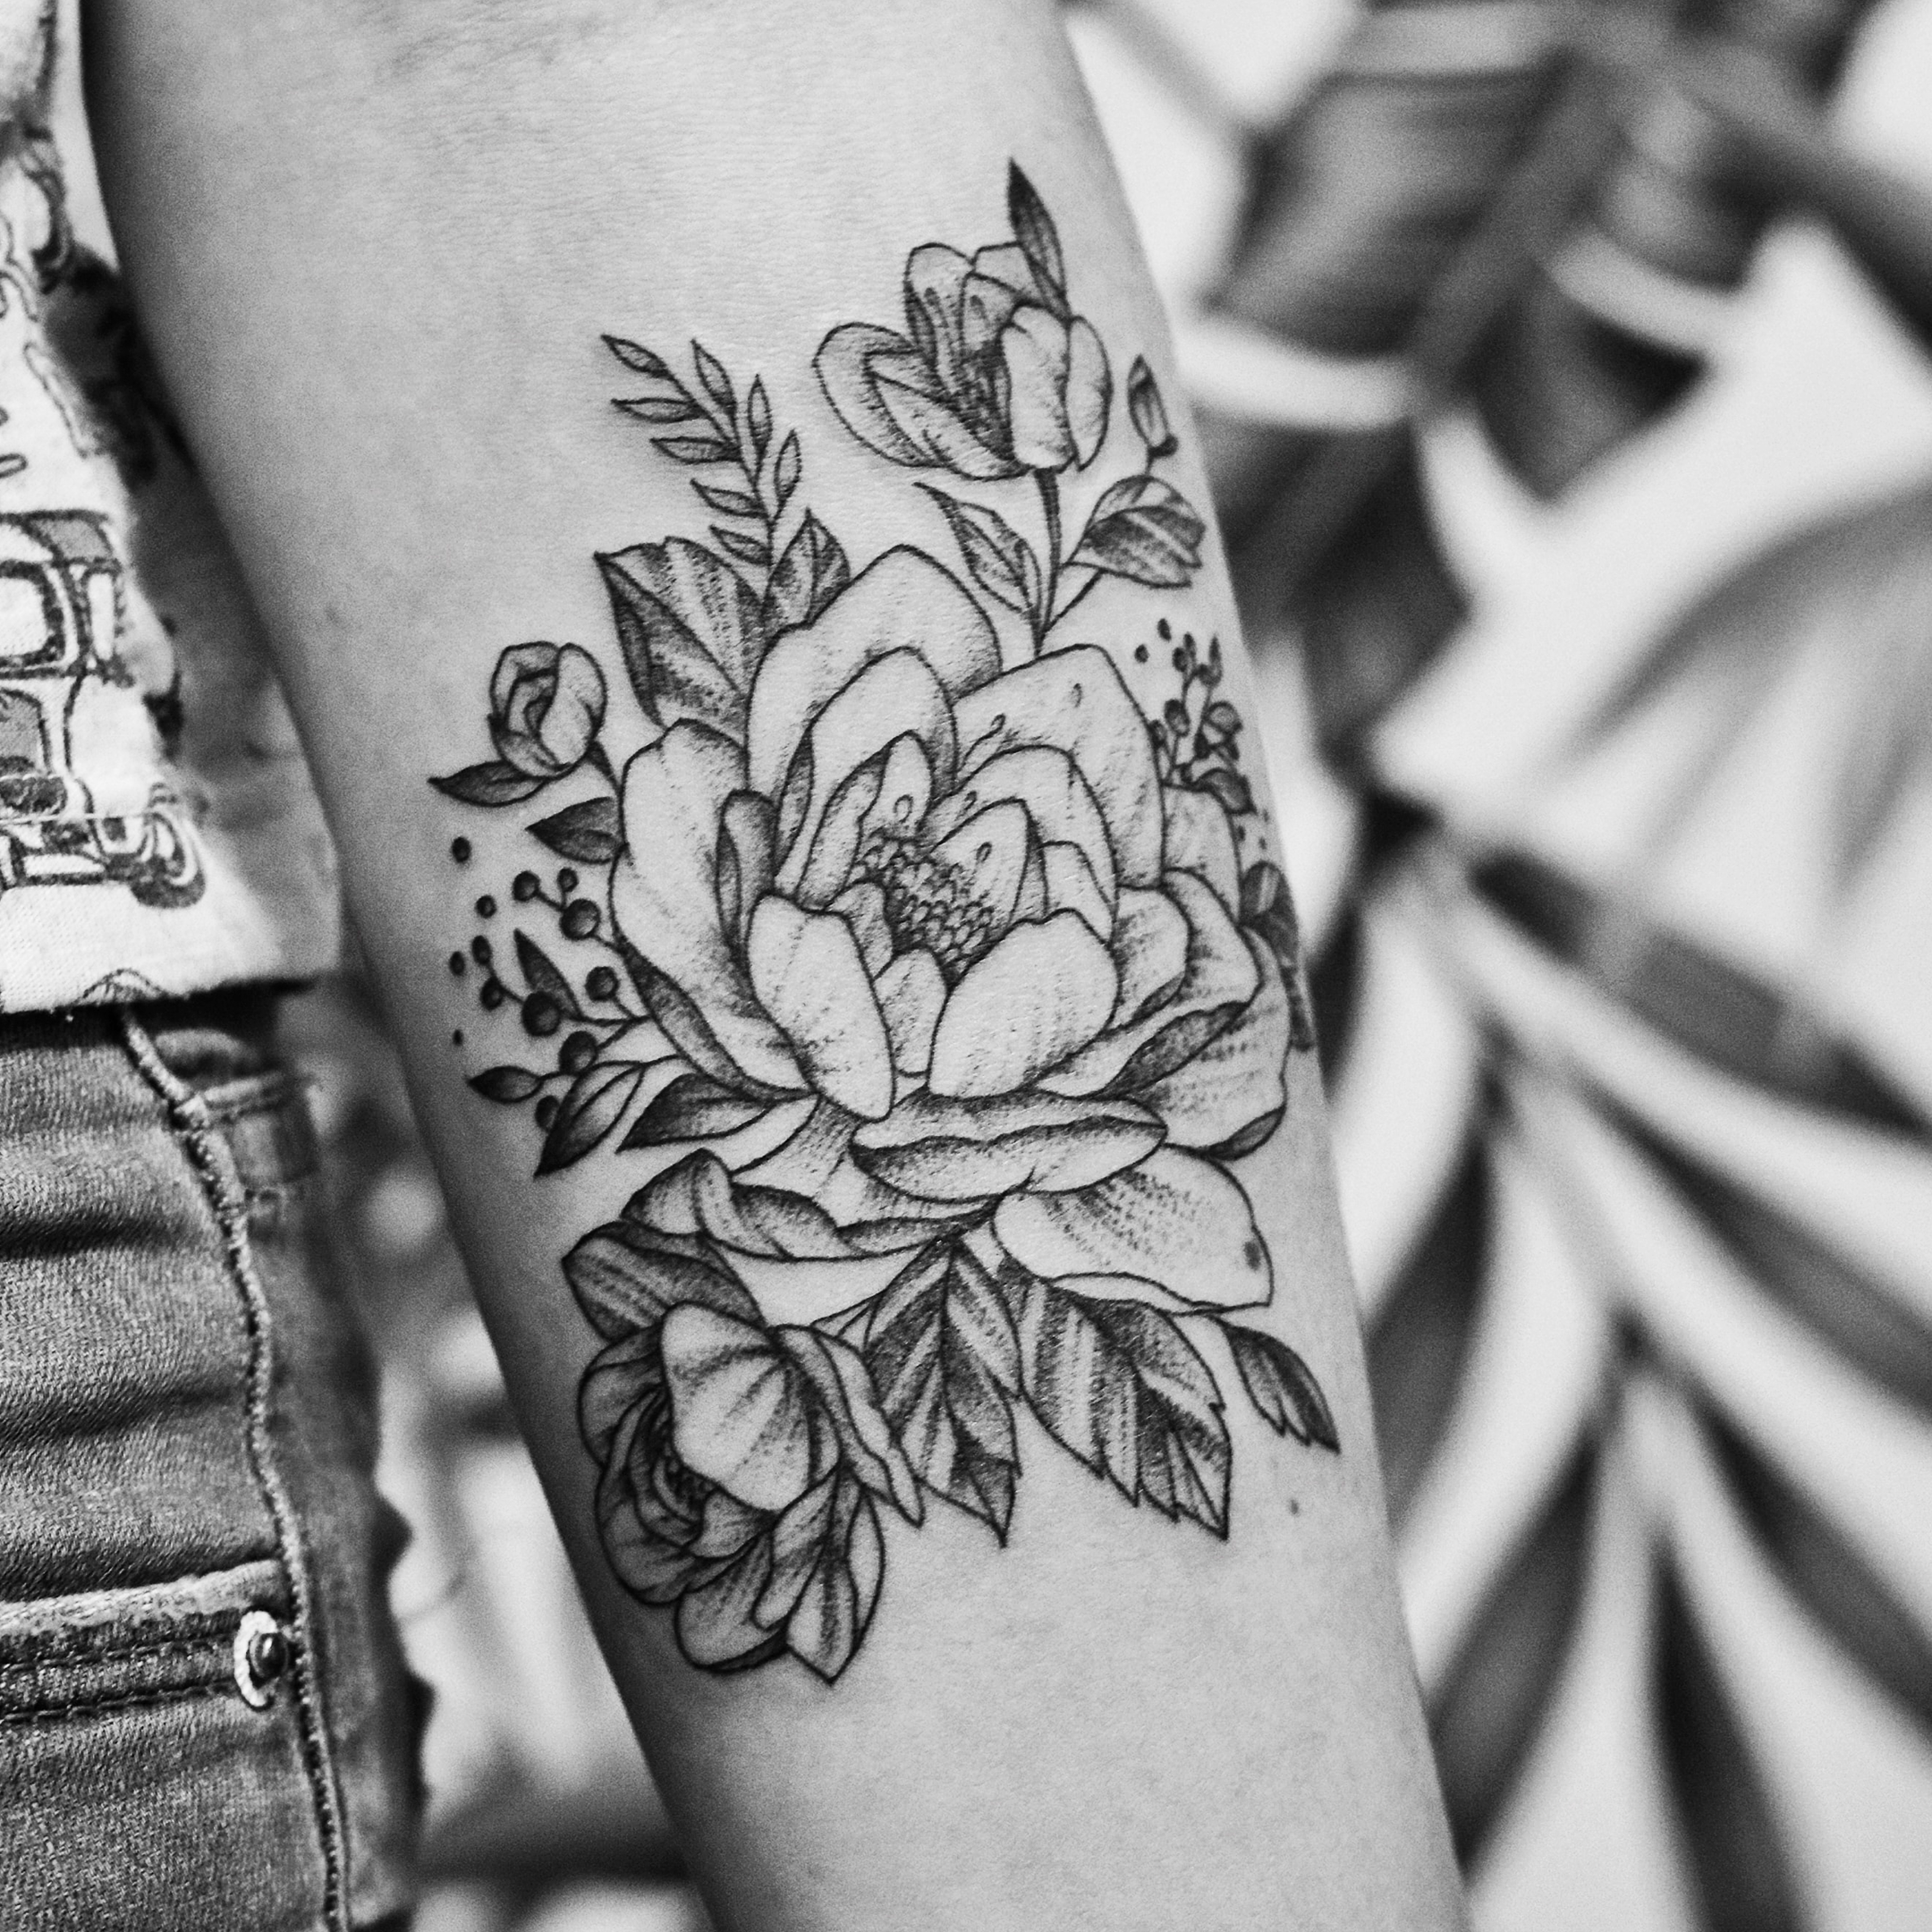 Help! What would cause bumps like this on a tattoo? #tattoo #tattoos  #beauty | Tattoos, Beauty, Sleep eye mask